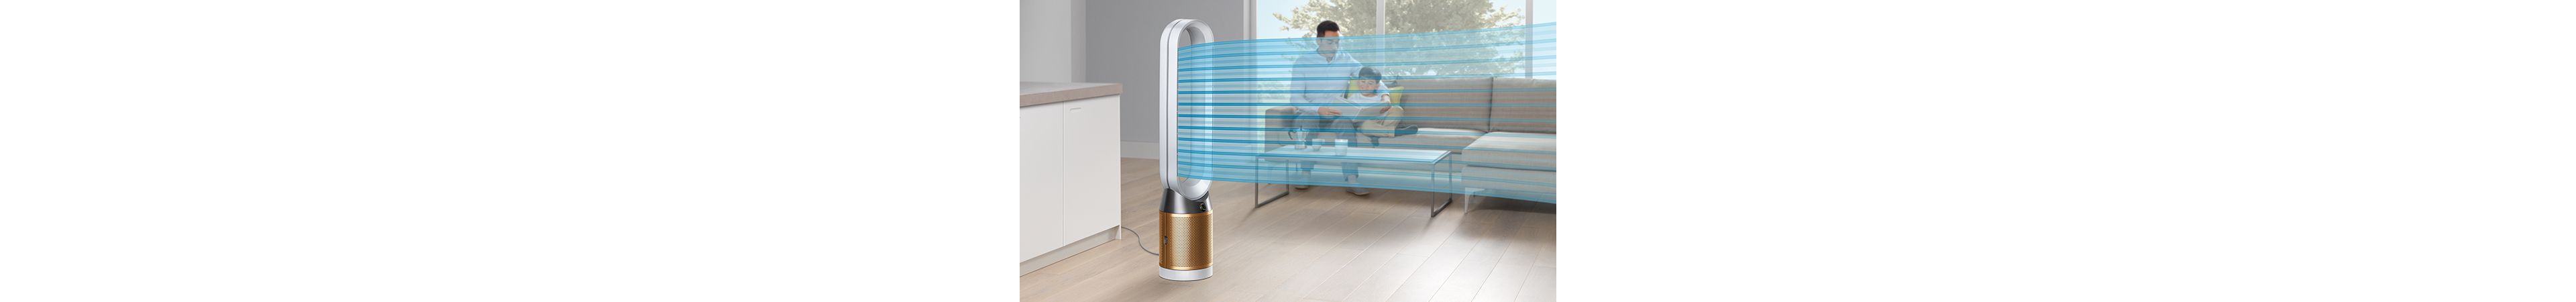 A Dyson Pure Cryptomic purifier projecting a cooling stream of air